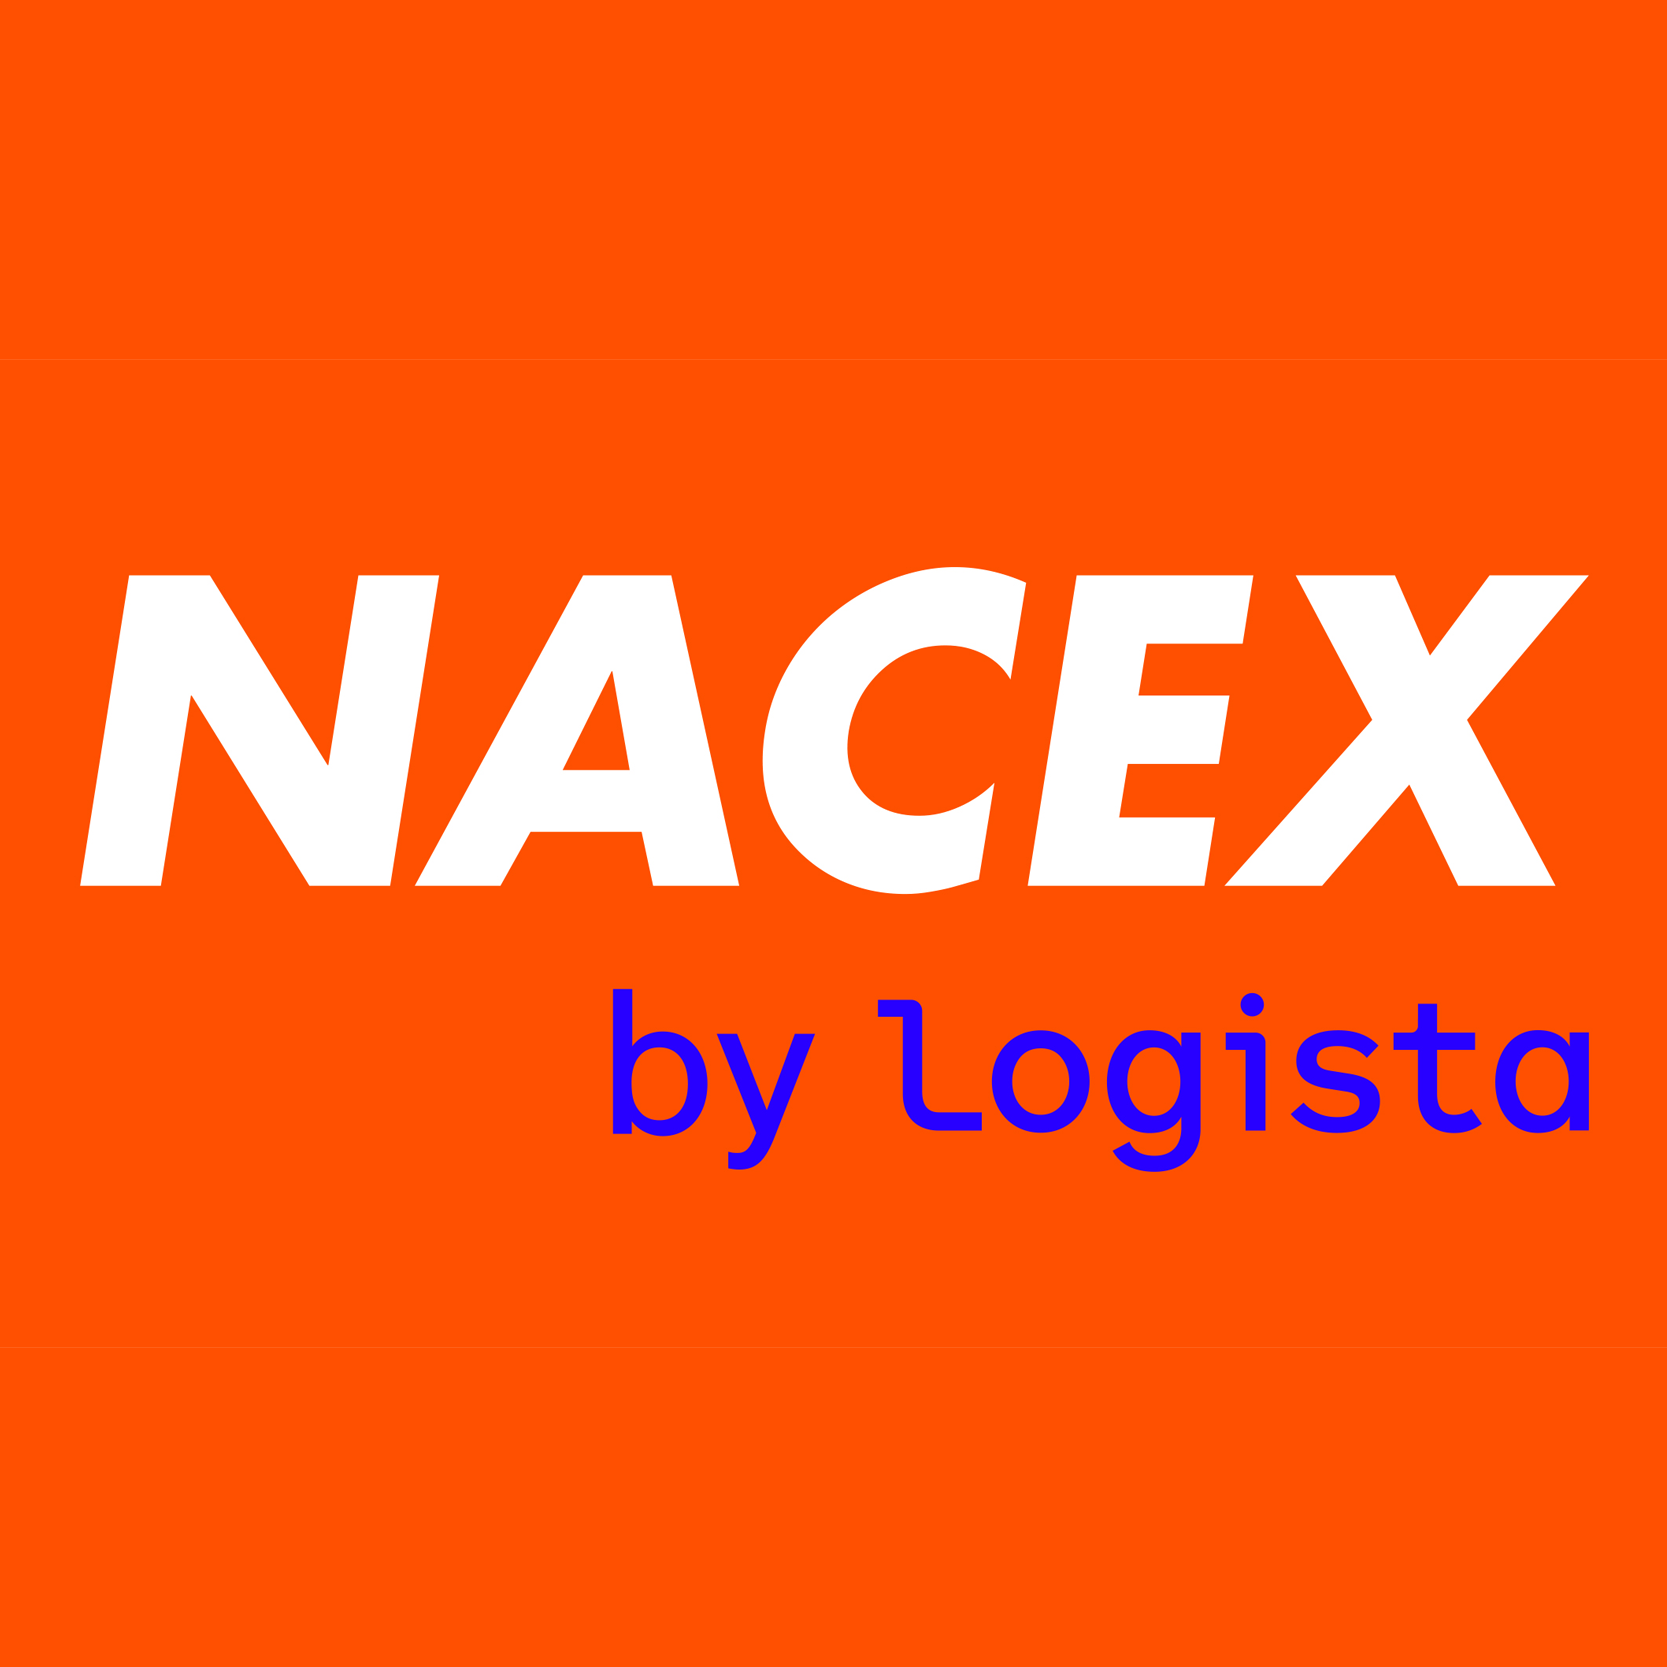 Nacex by logista